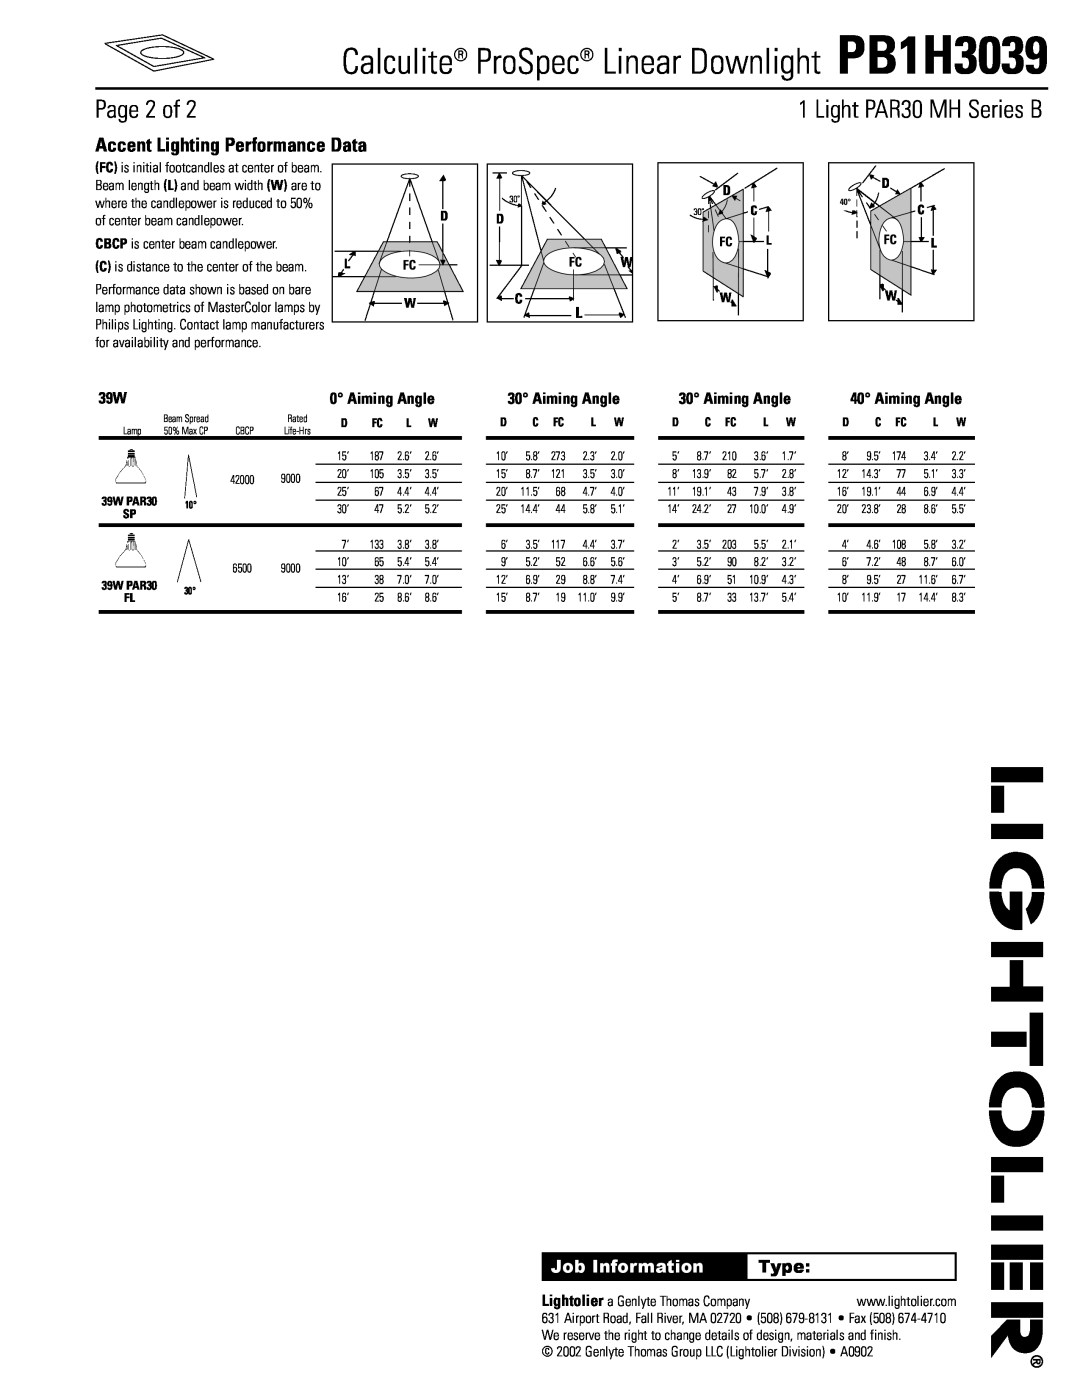 Lightolier Page 2 of, Accent Lighting Performance Data, Type, Calculite ProSpec Linear Downlight PB1H3039, Aiming Angle 